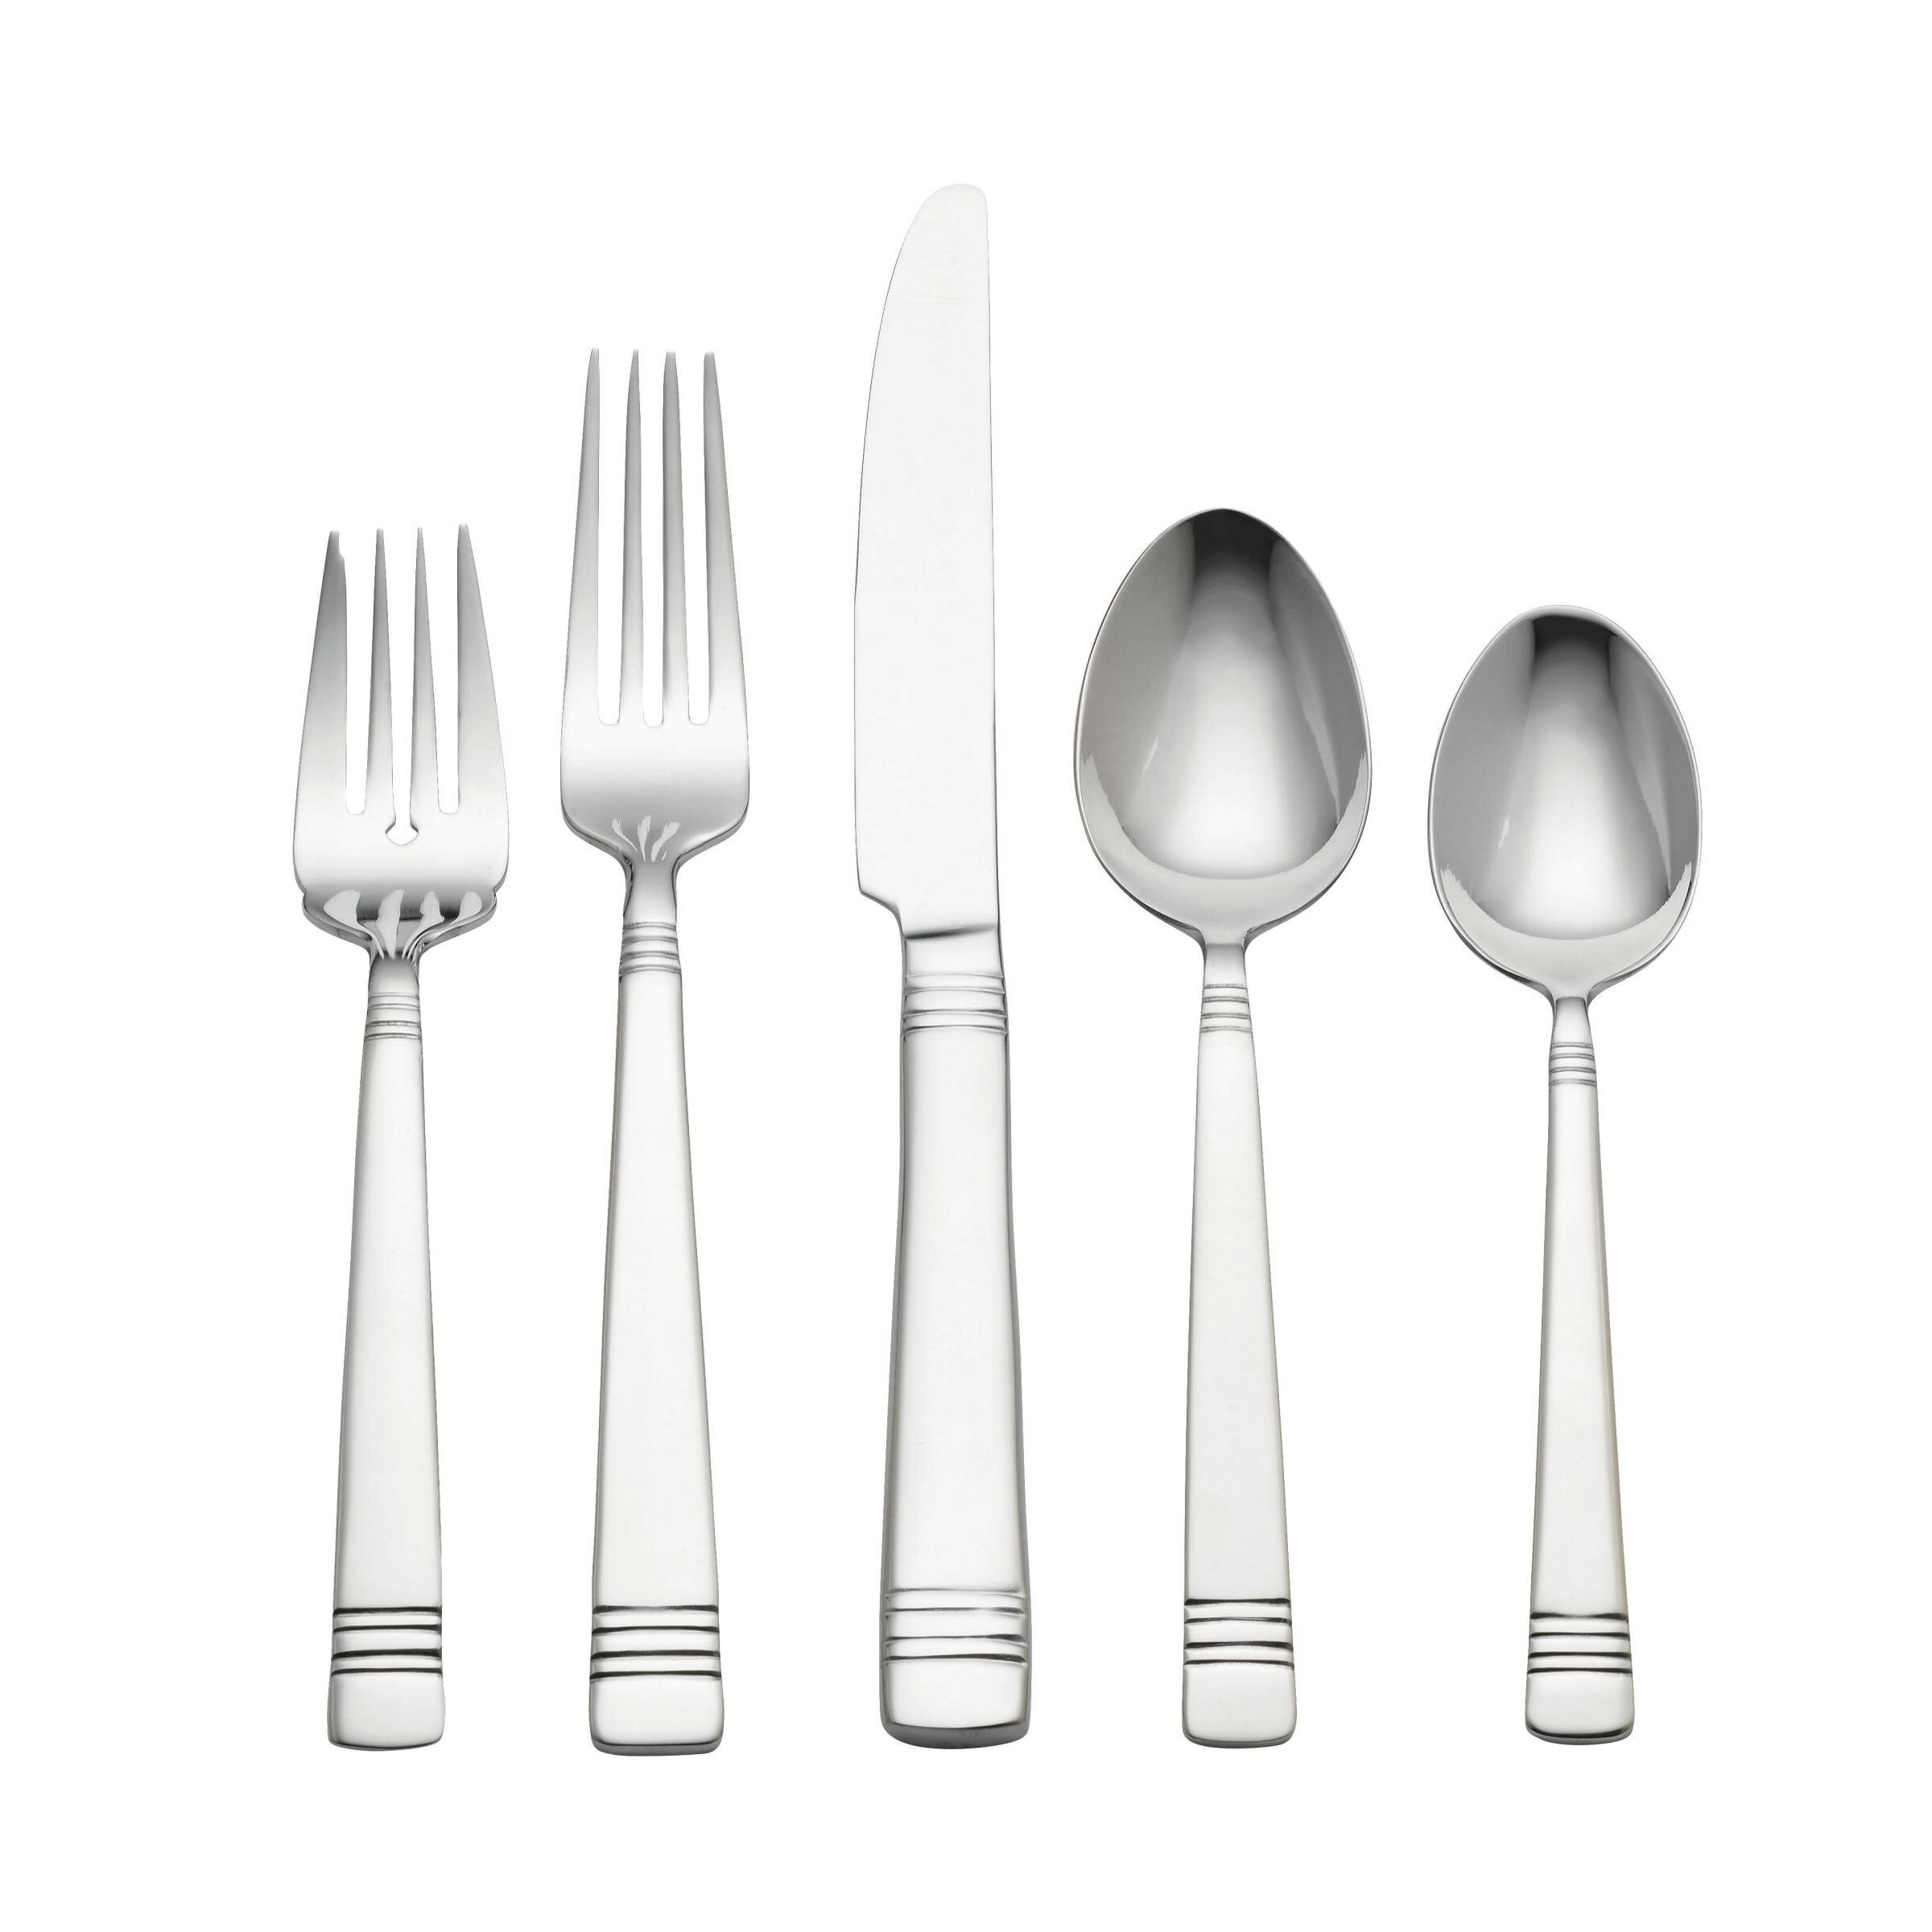 Silverware NEW Your Choice Reed & Barton Stainless ENGLISH HAMMERED Flatware 